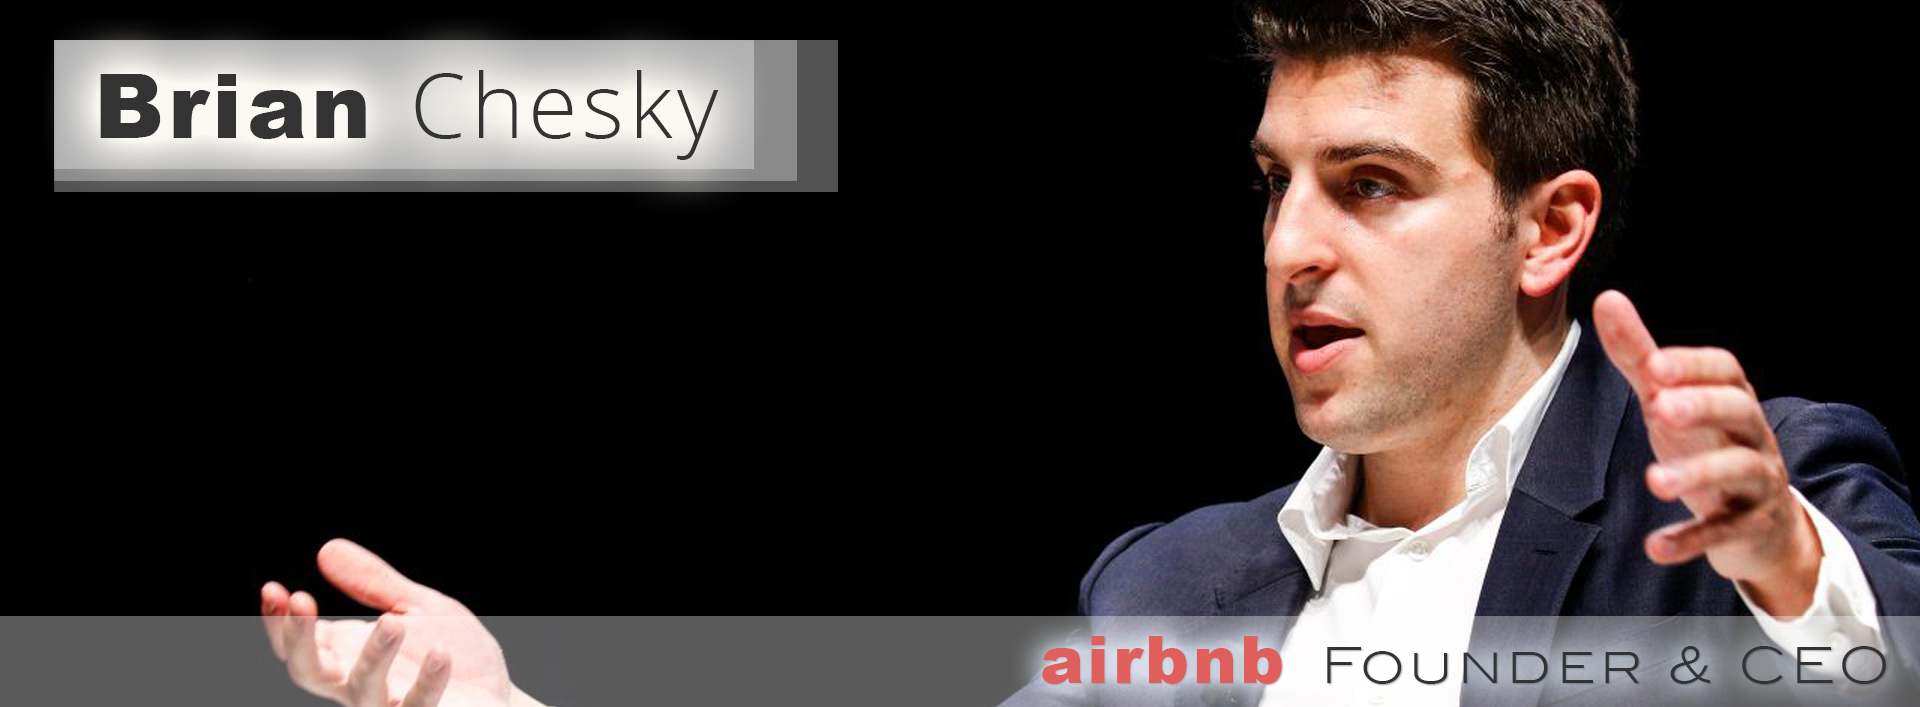 Brian-Chesky__Airbnb-Founder-&-CEO-3